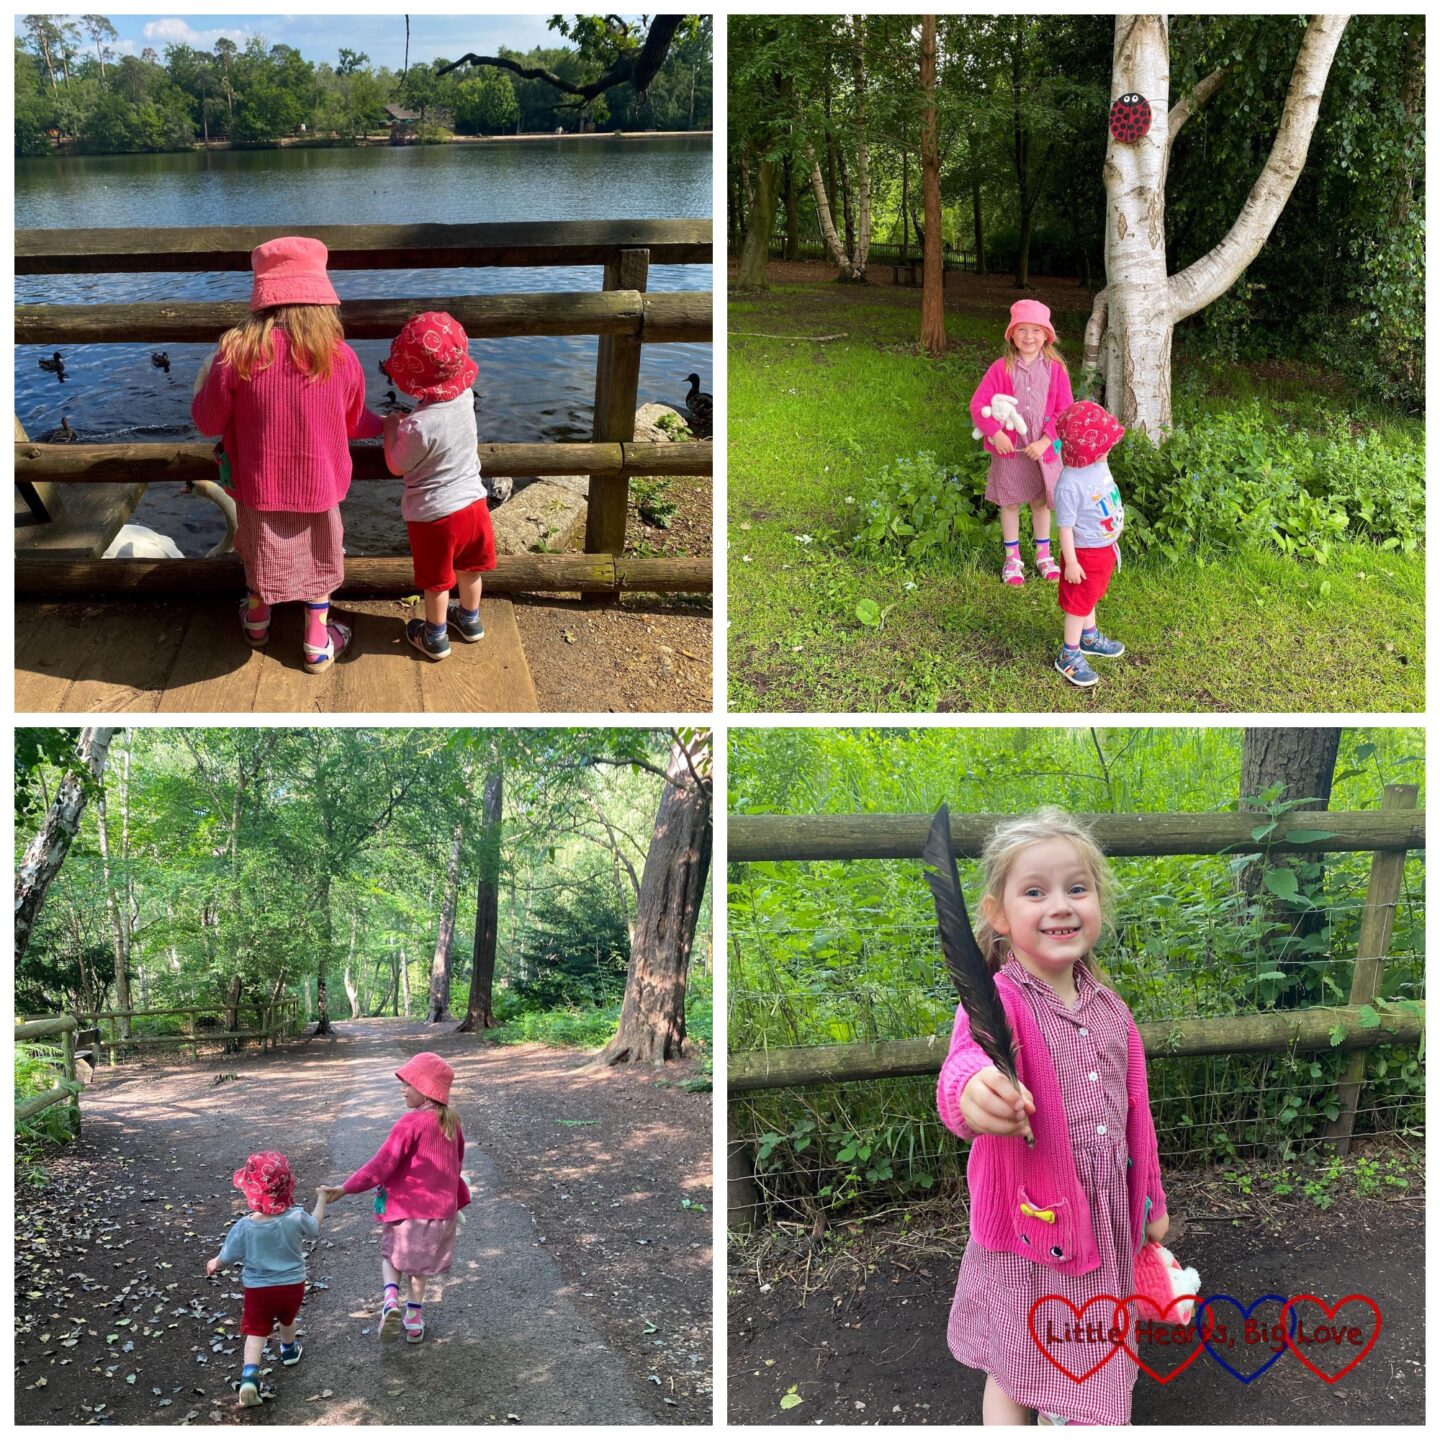 Sophie and Thomas feeding the ducks at Black Park; Sophie and Thomas standing in front of a birch tree with a giant wooden ladybird above them; Sophie and Thomas walking hand-in-hand through the woods; Sophie holding a large black feather